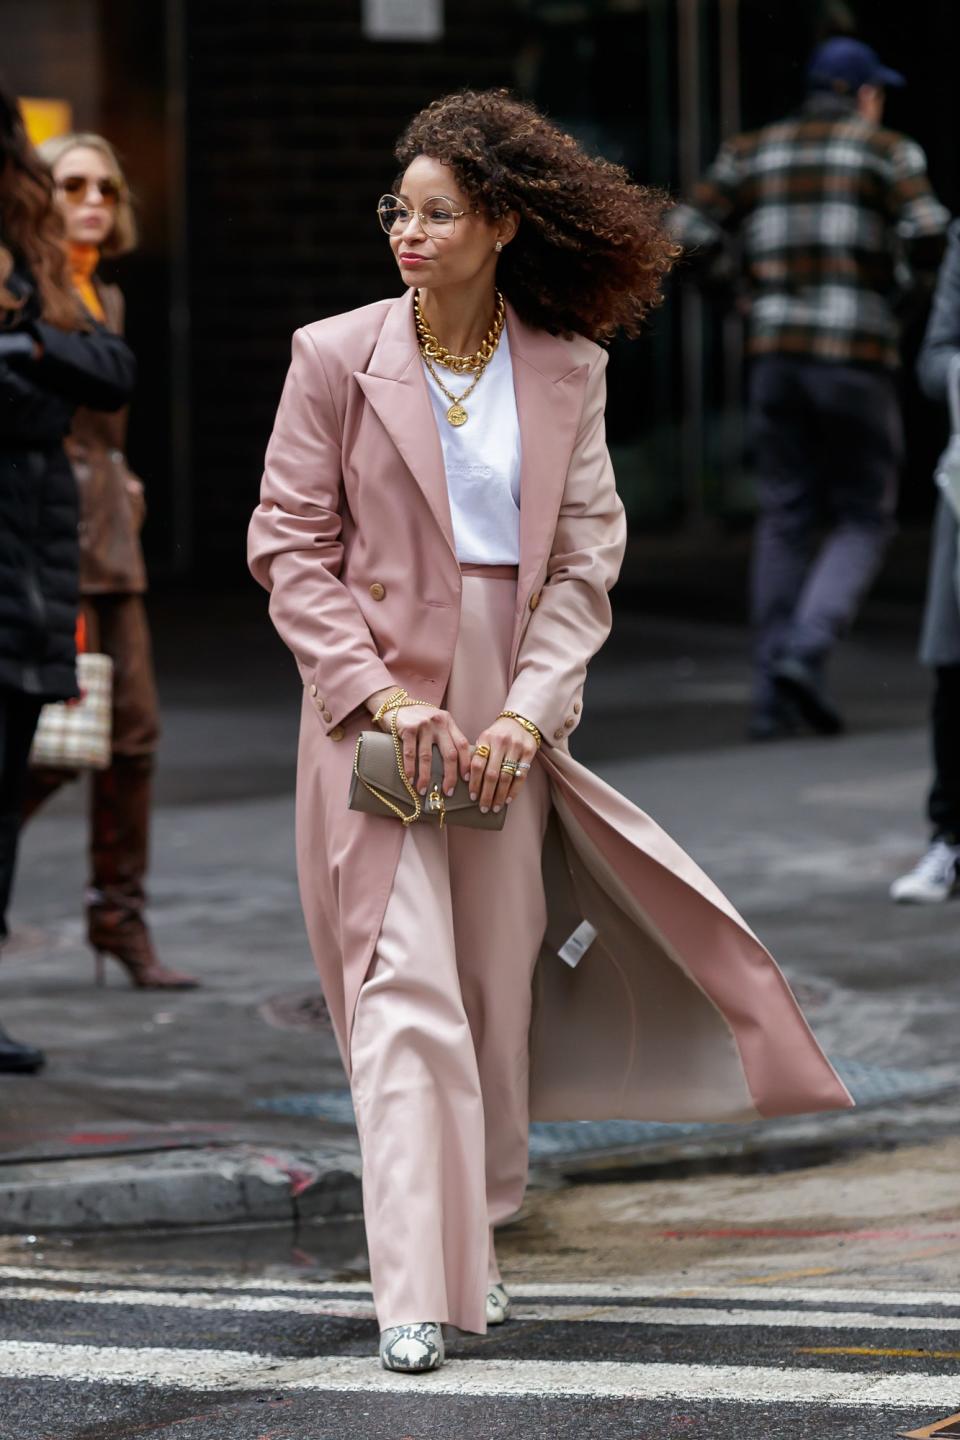 The Best Street Style Looks From New York Fashion Week 2020